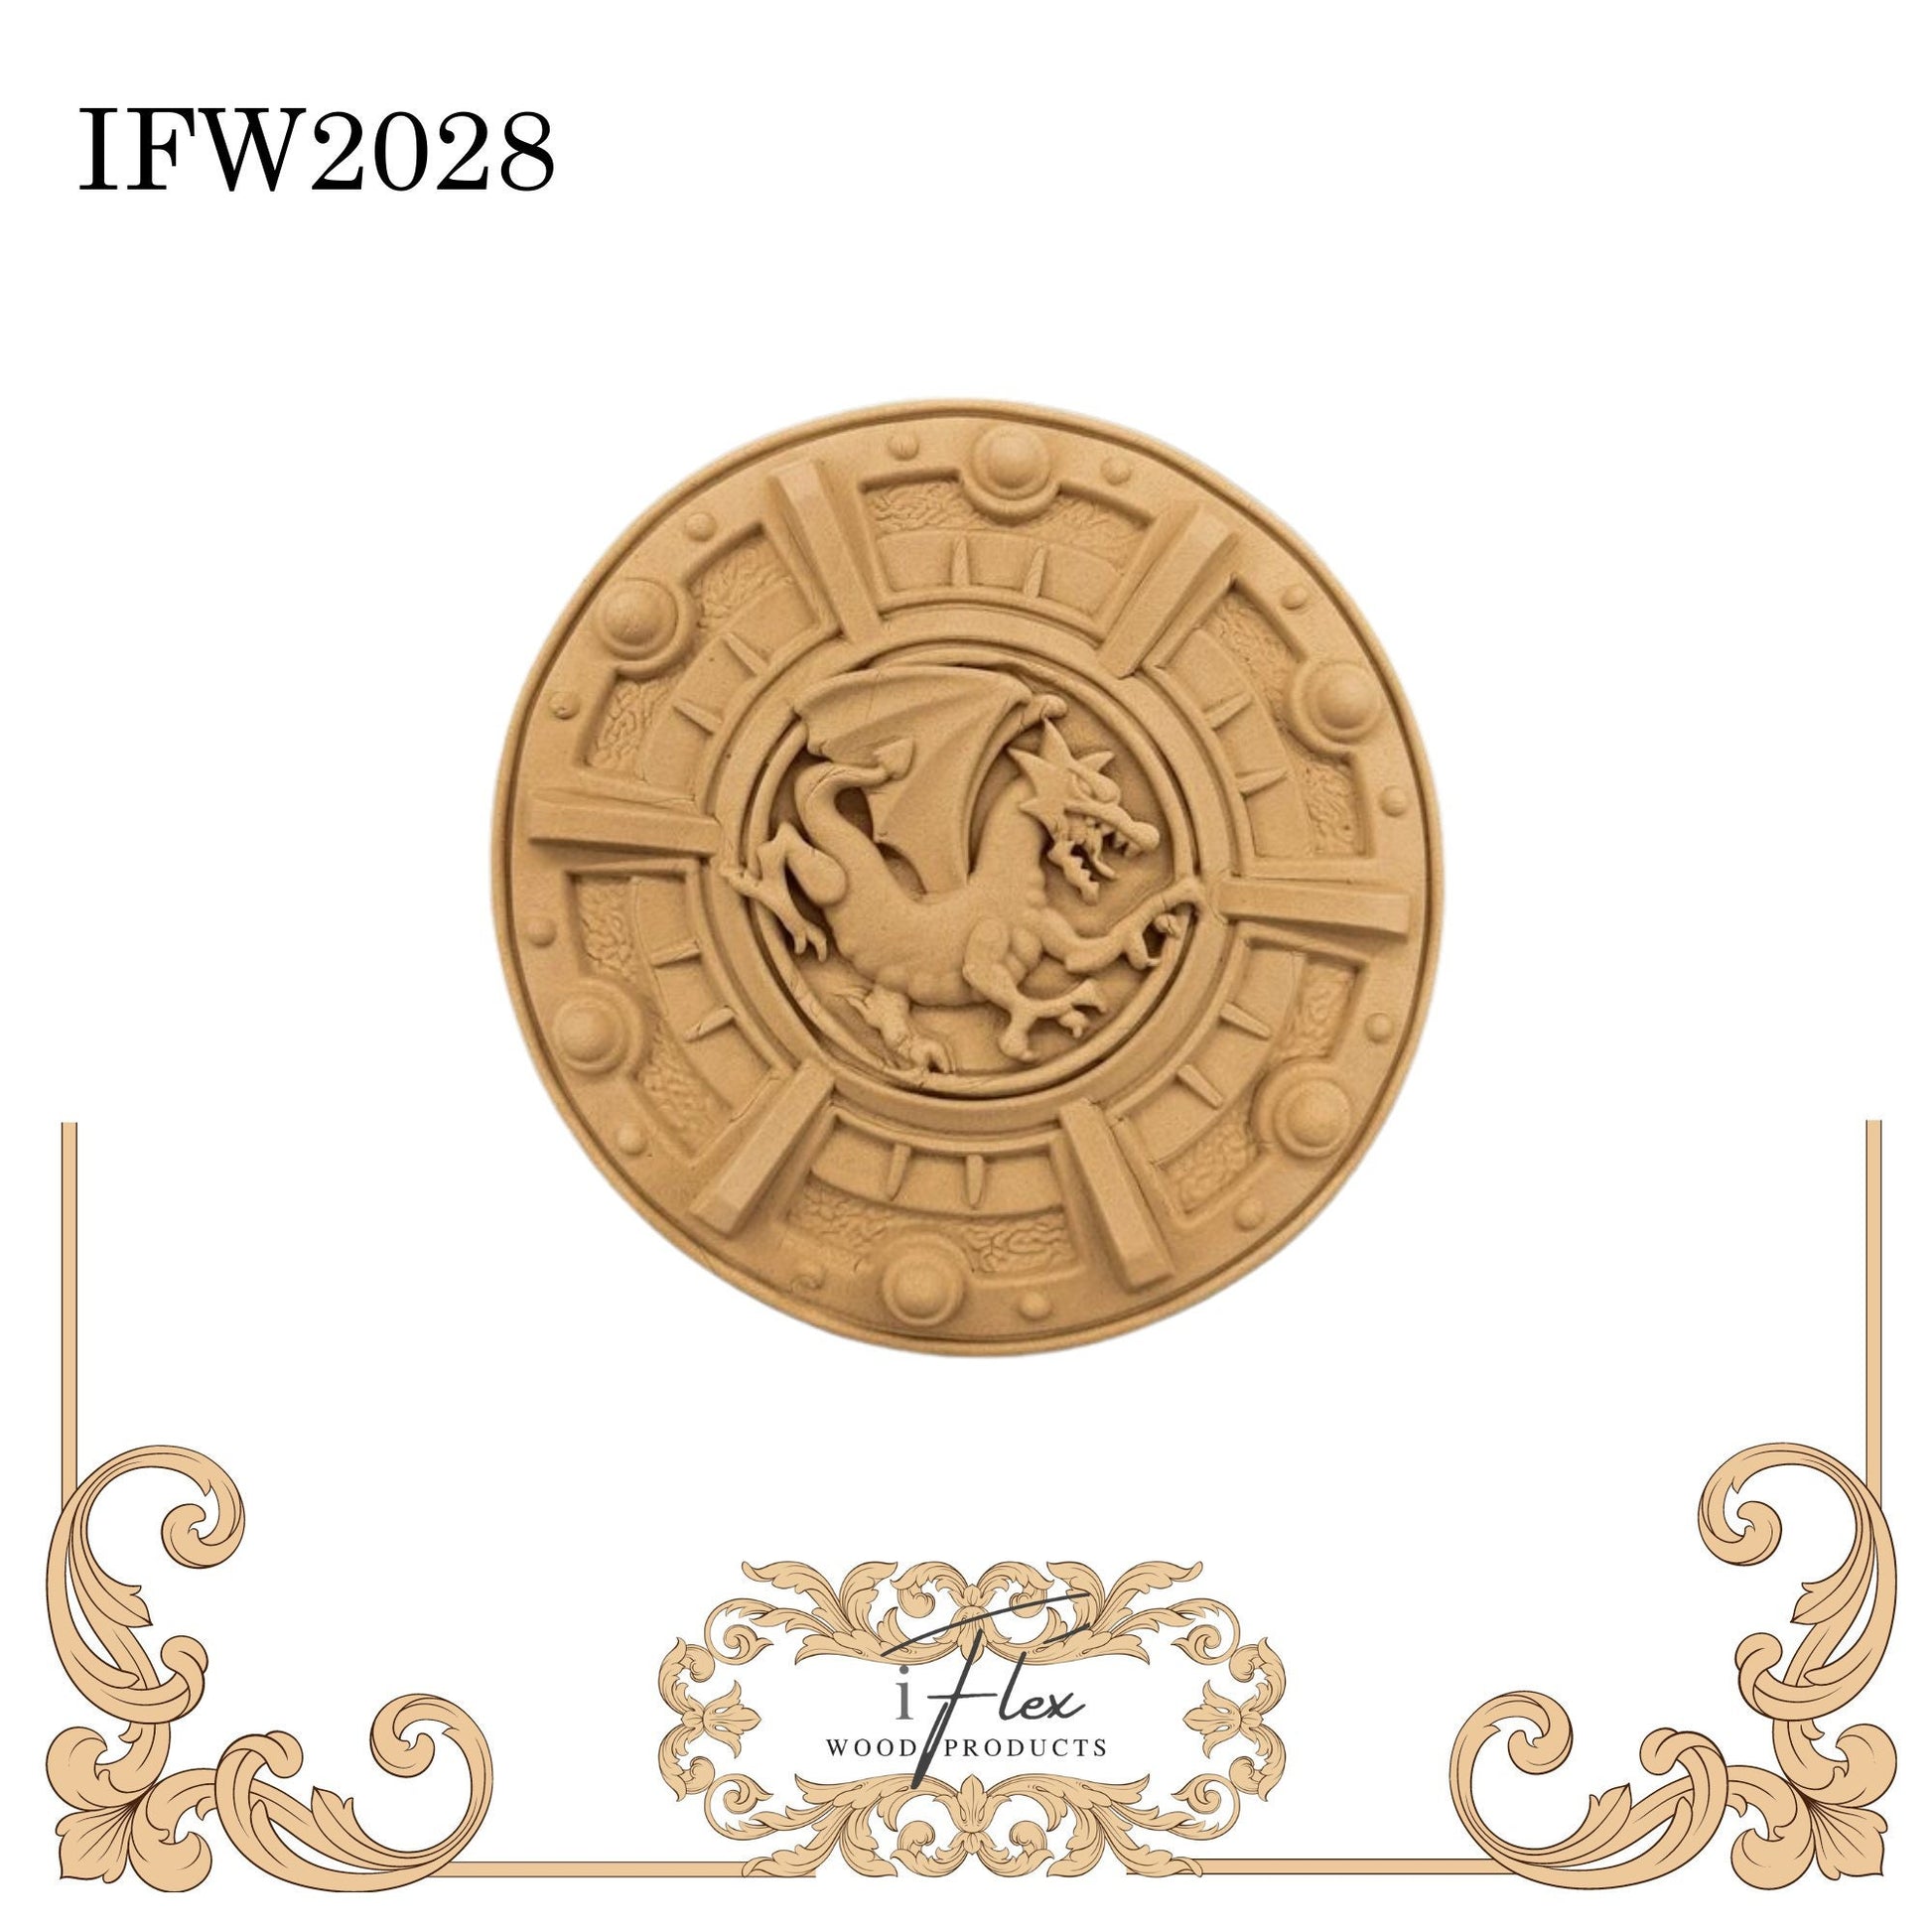 IFW 2028 iFlex Wood Products, bendable mouldings, flexible, wooden appliques, centerpiece, shield, steampunk